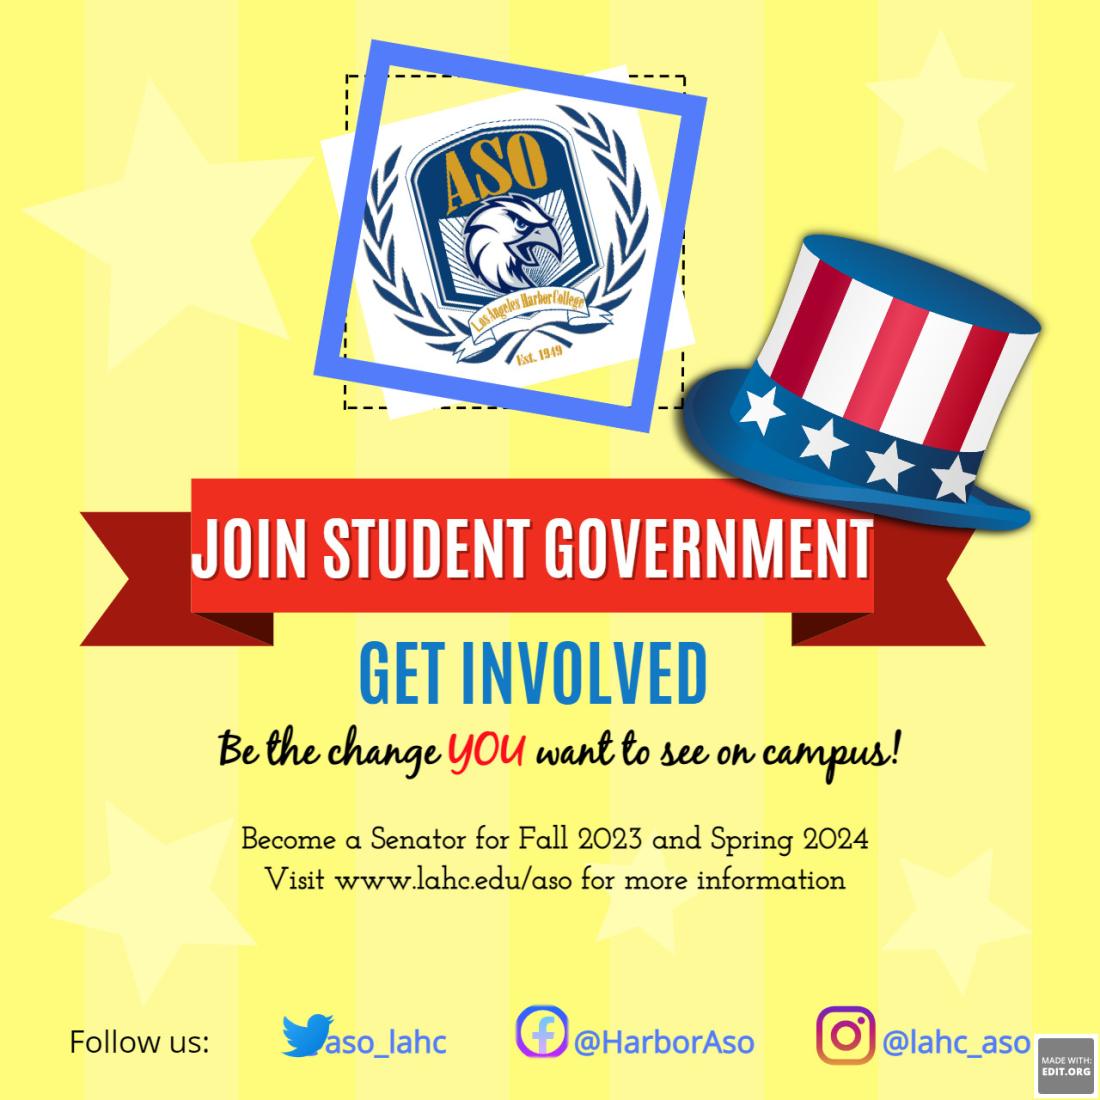 Get involved - Join student government